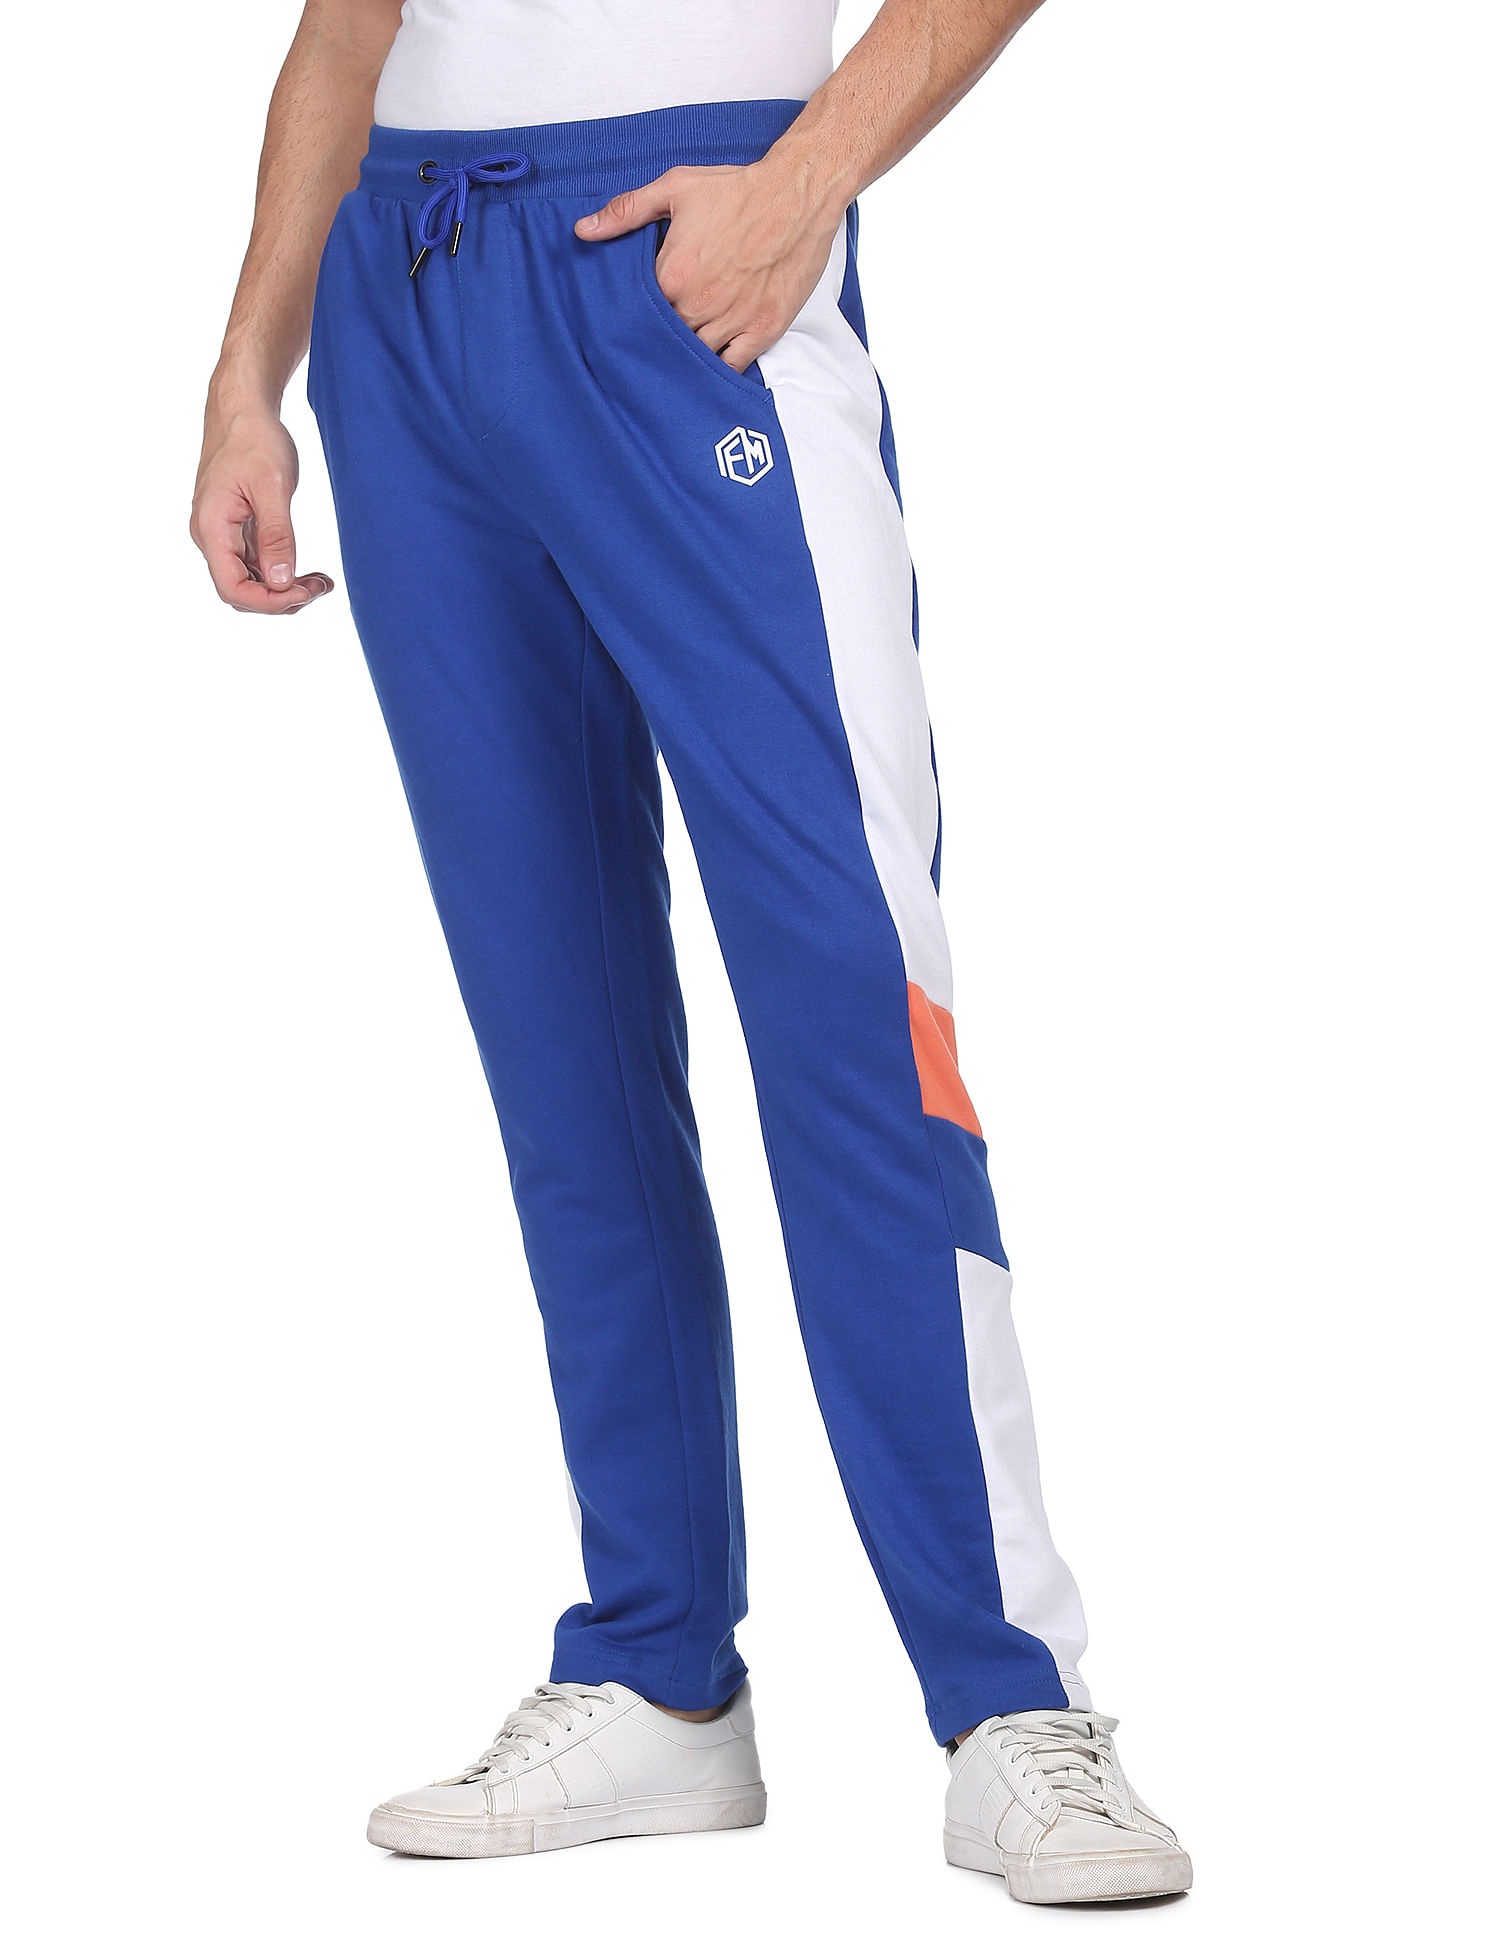 Discover 189+ white and blue track pants 